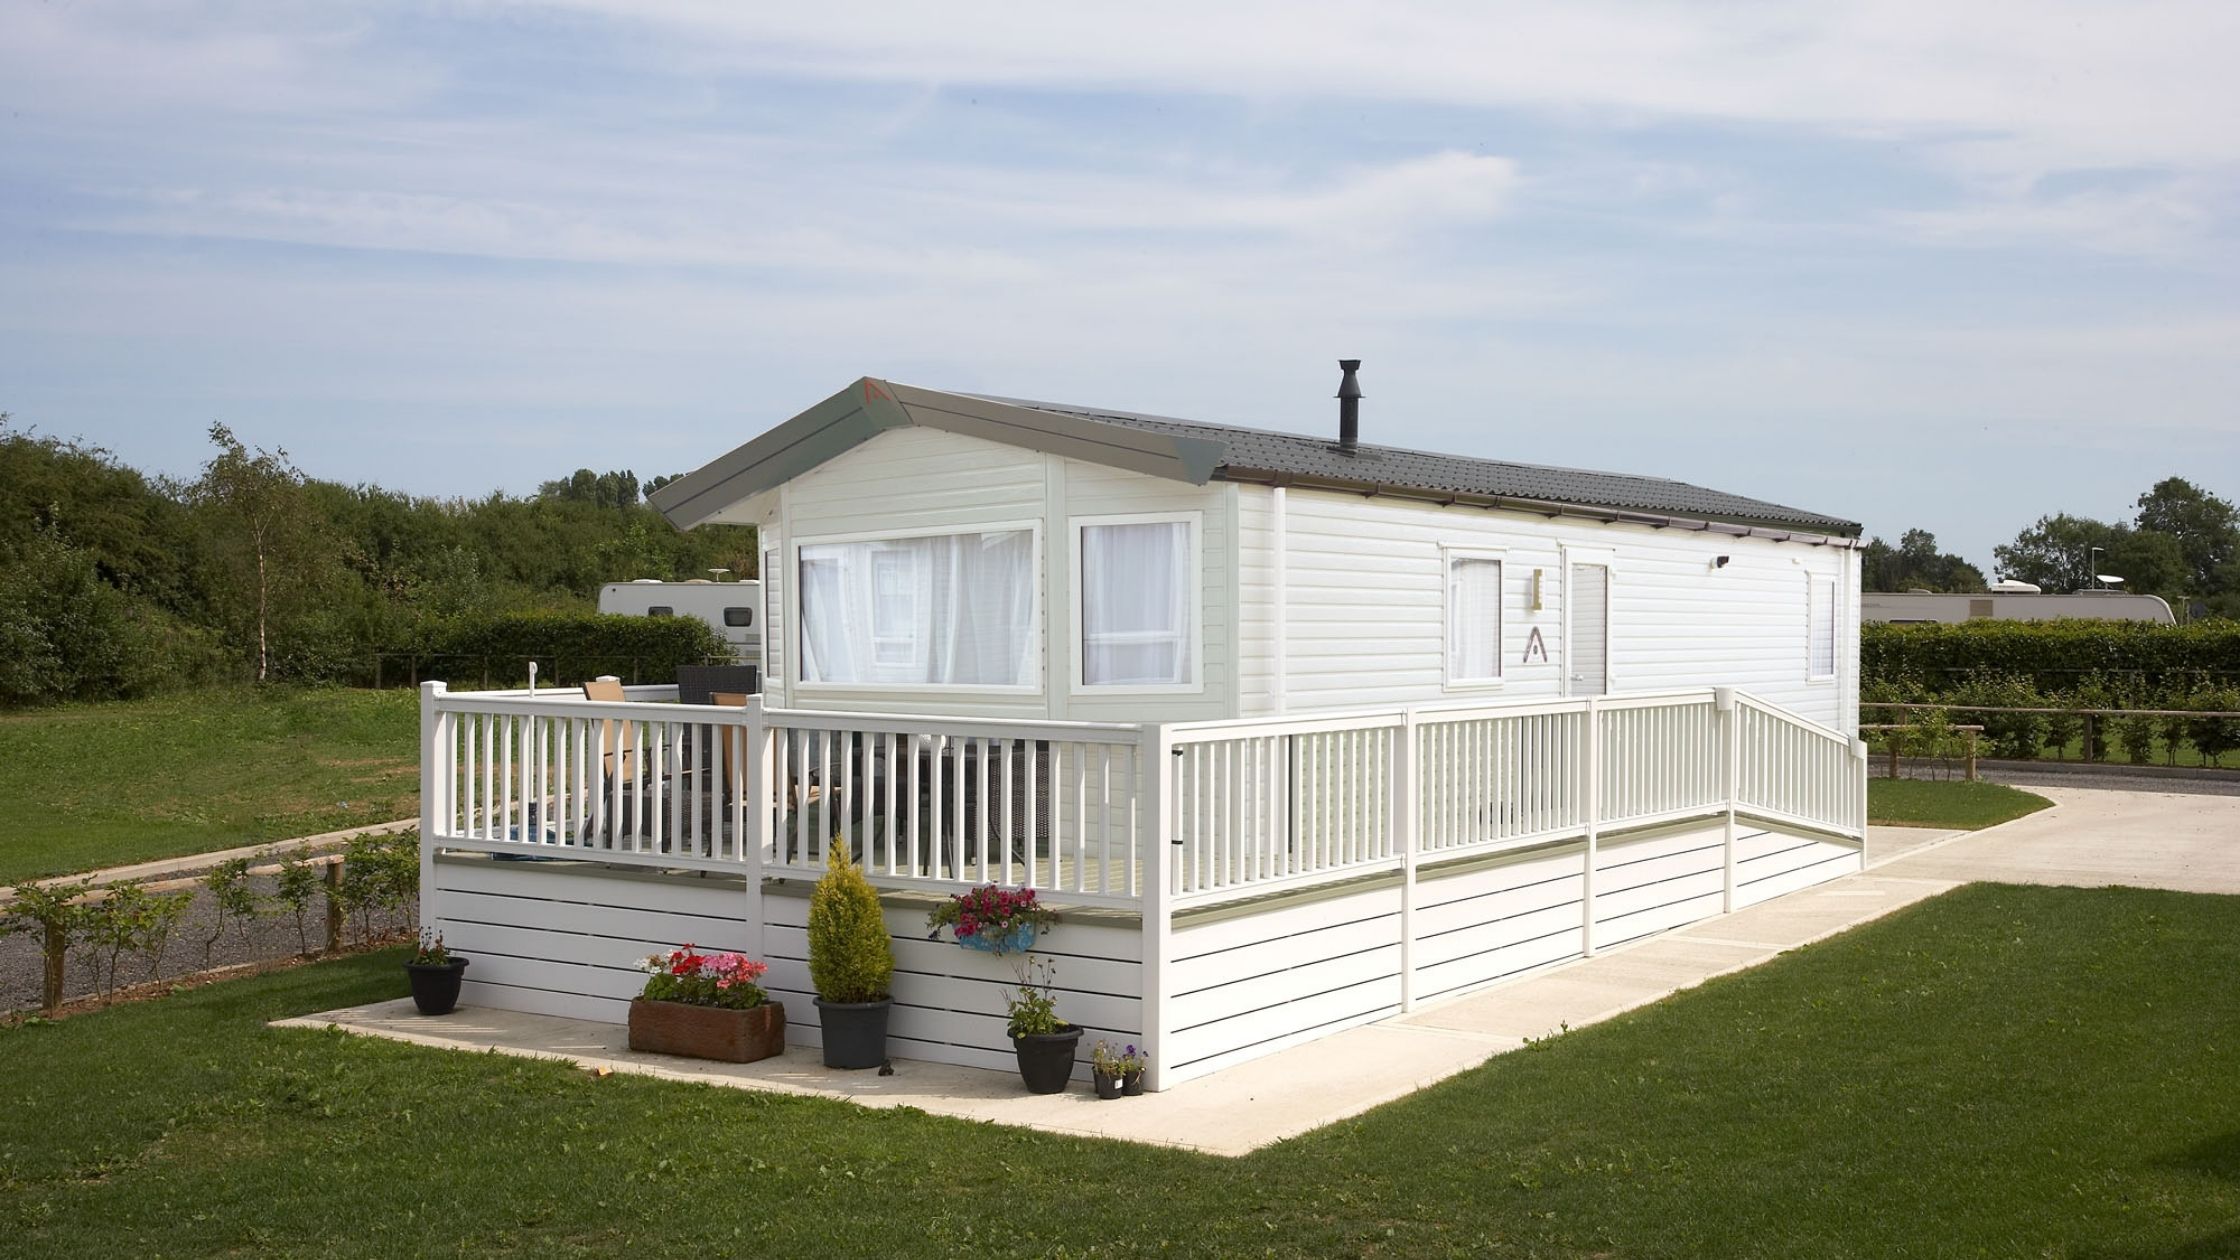 Holiday Homes Tax Guide: An Introduction